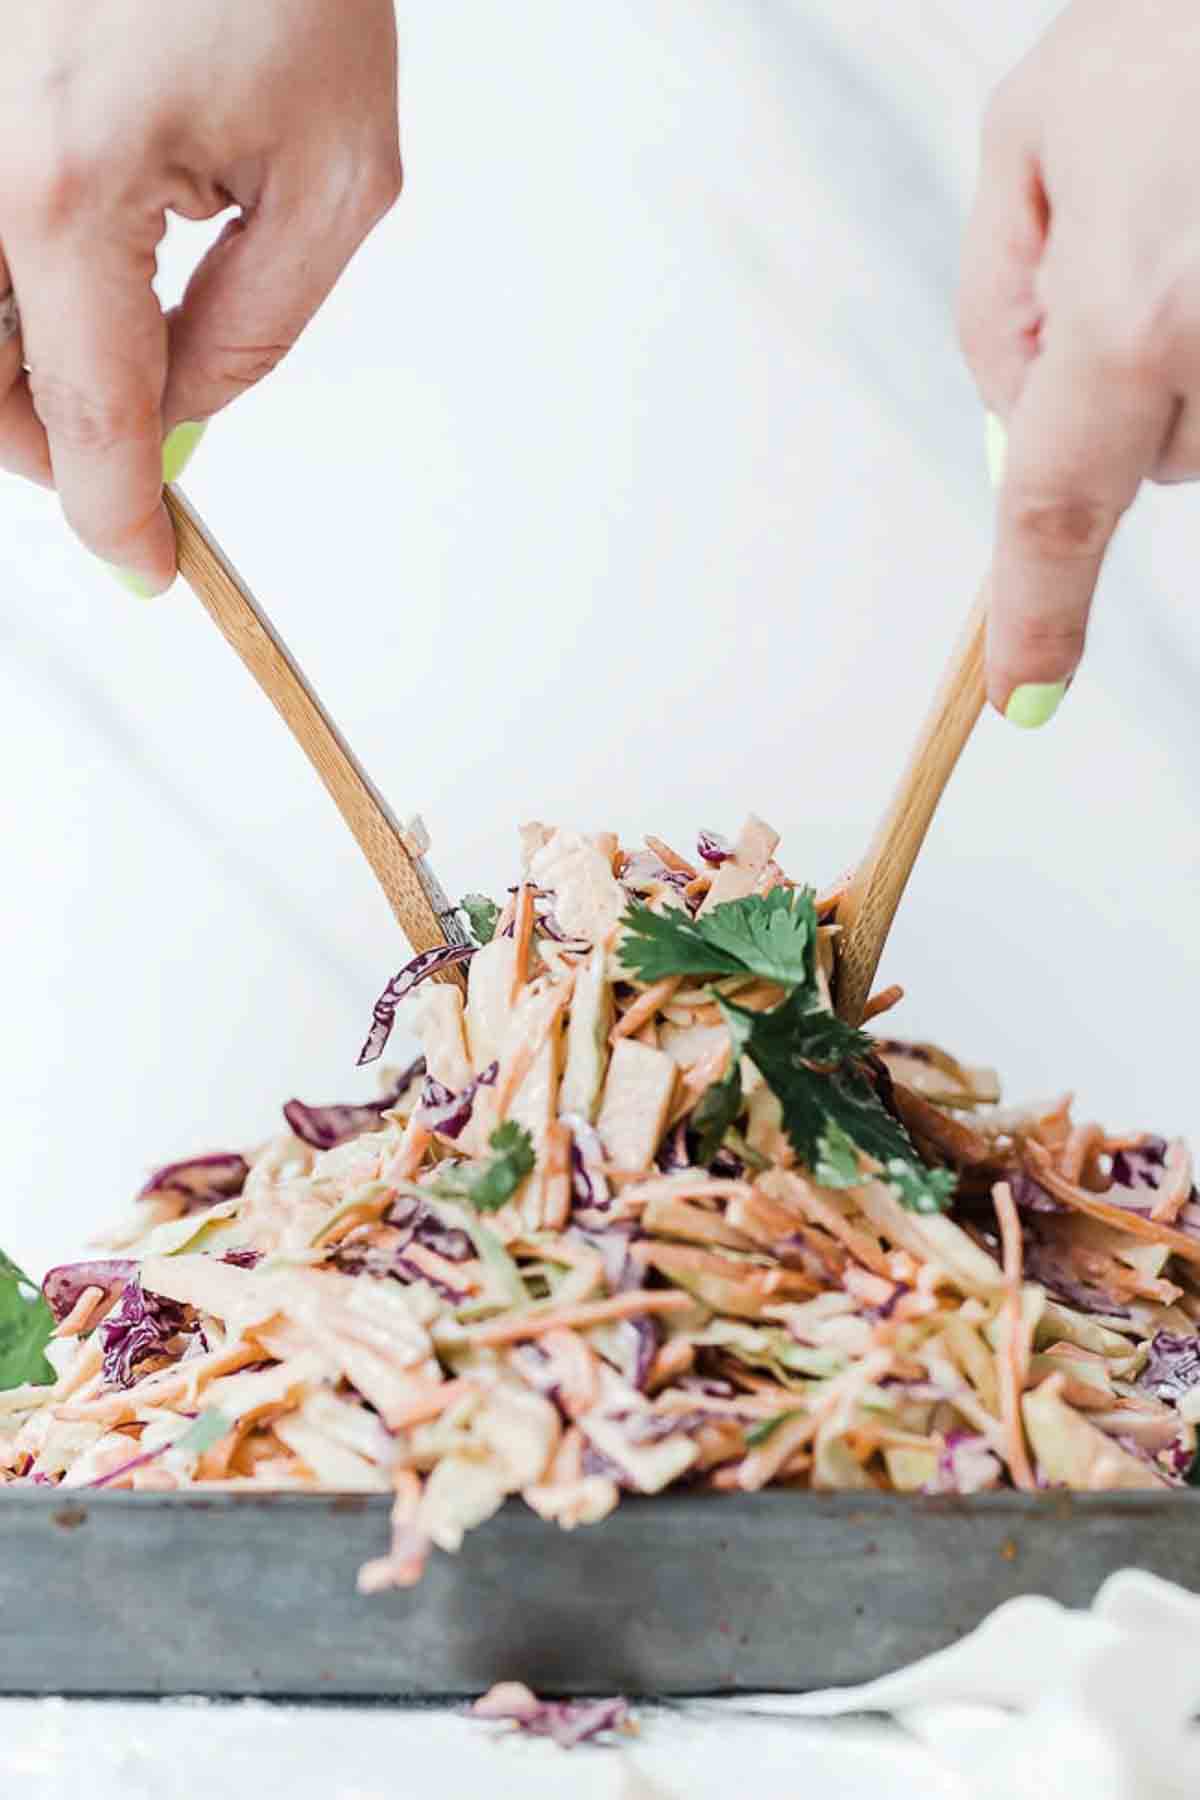 Apple cabbage slaw on the table with hands using spoons to lift out a serving.